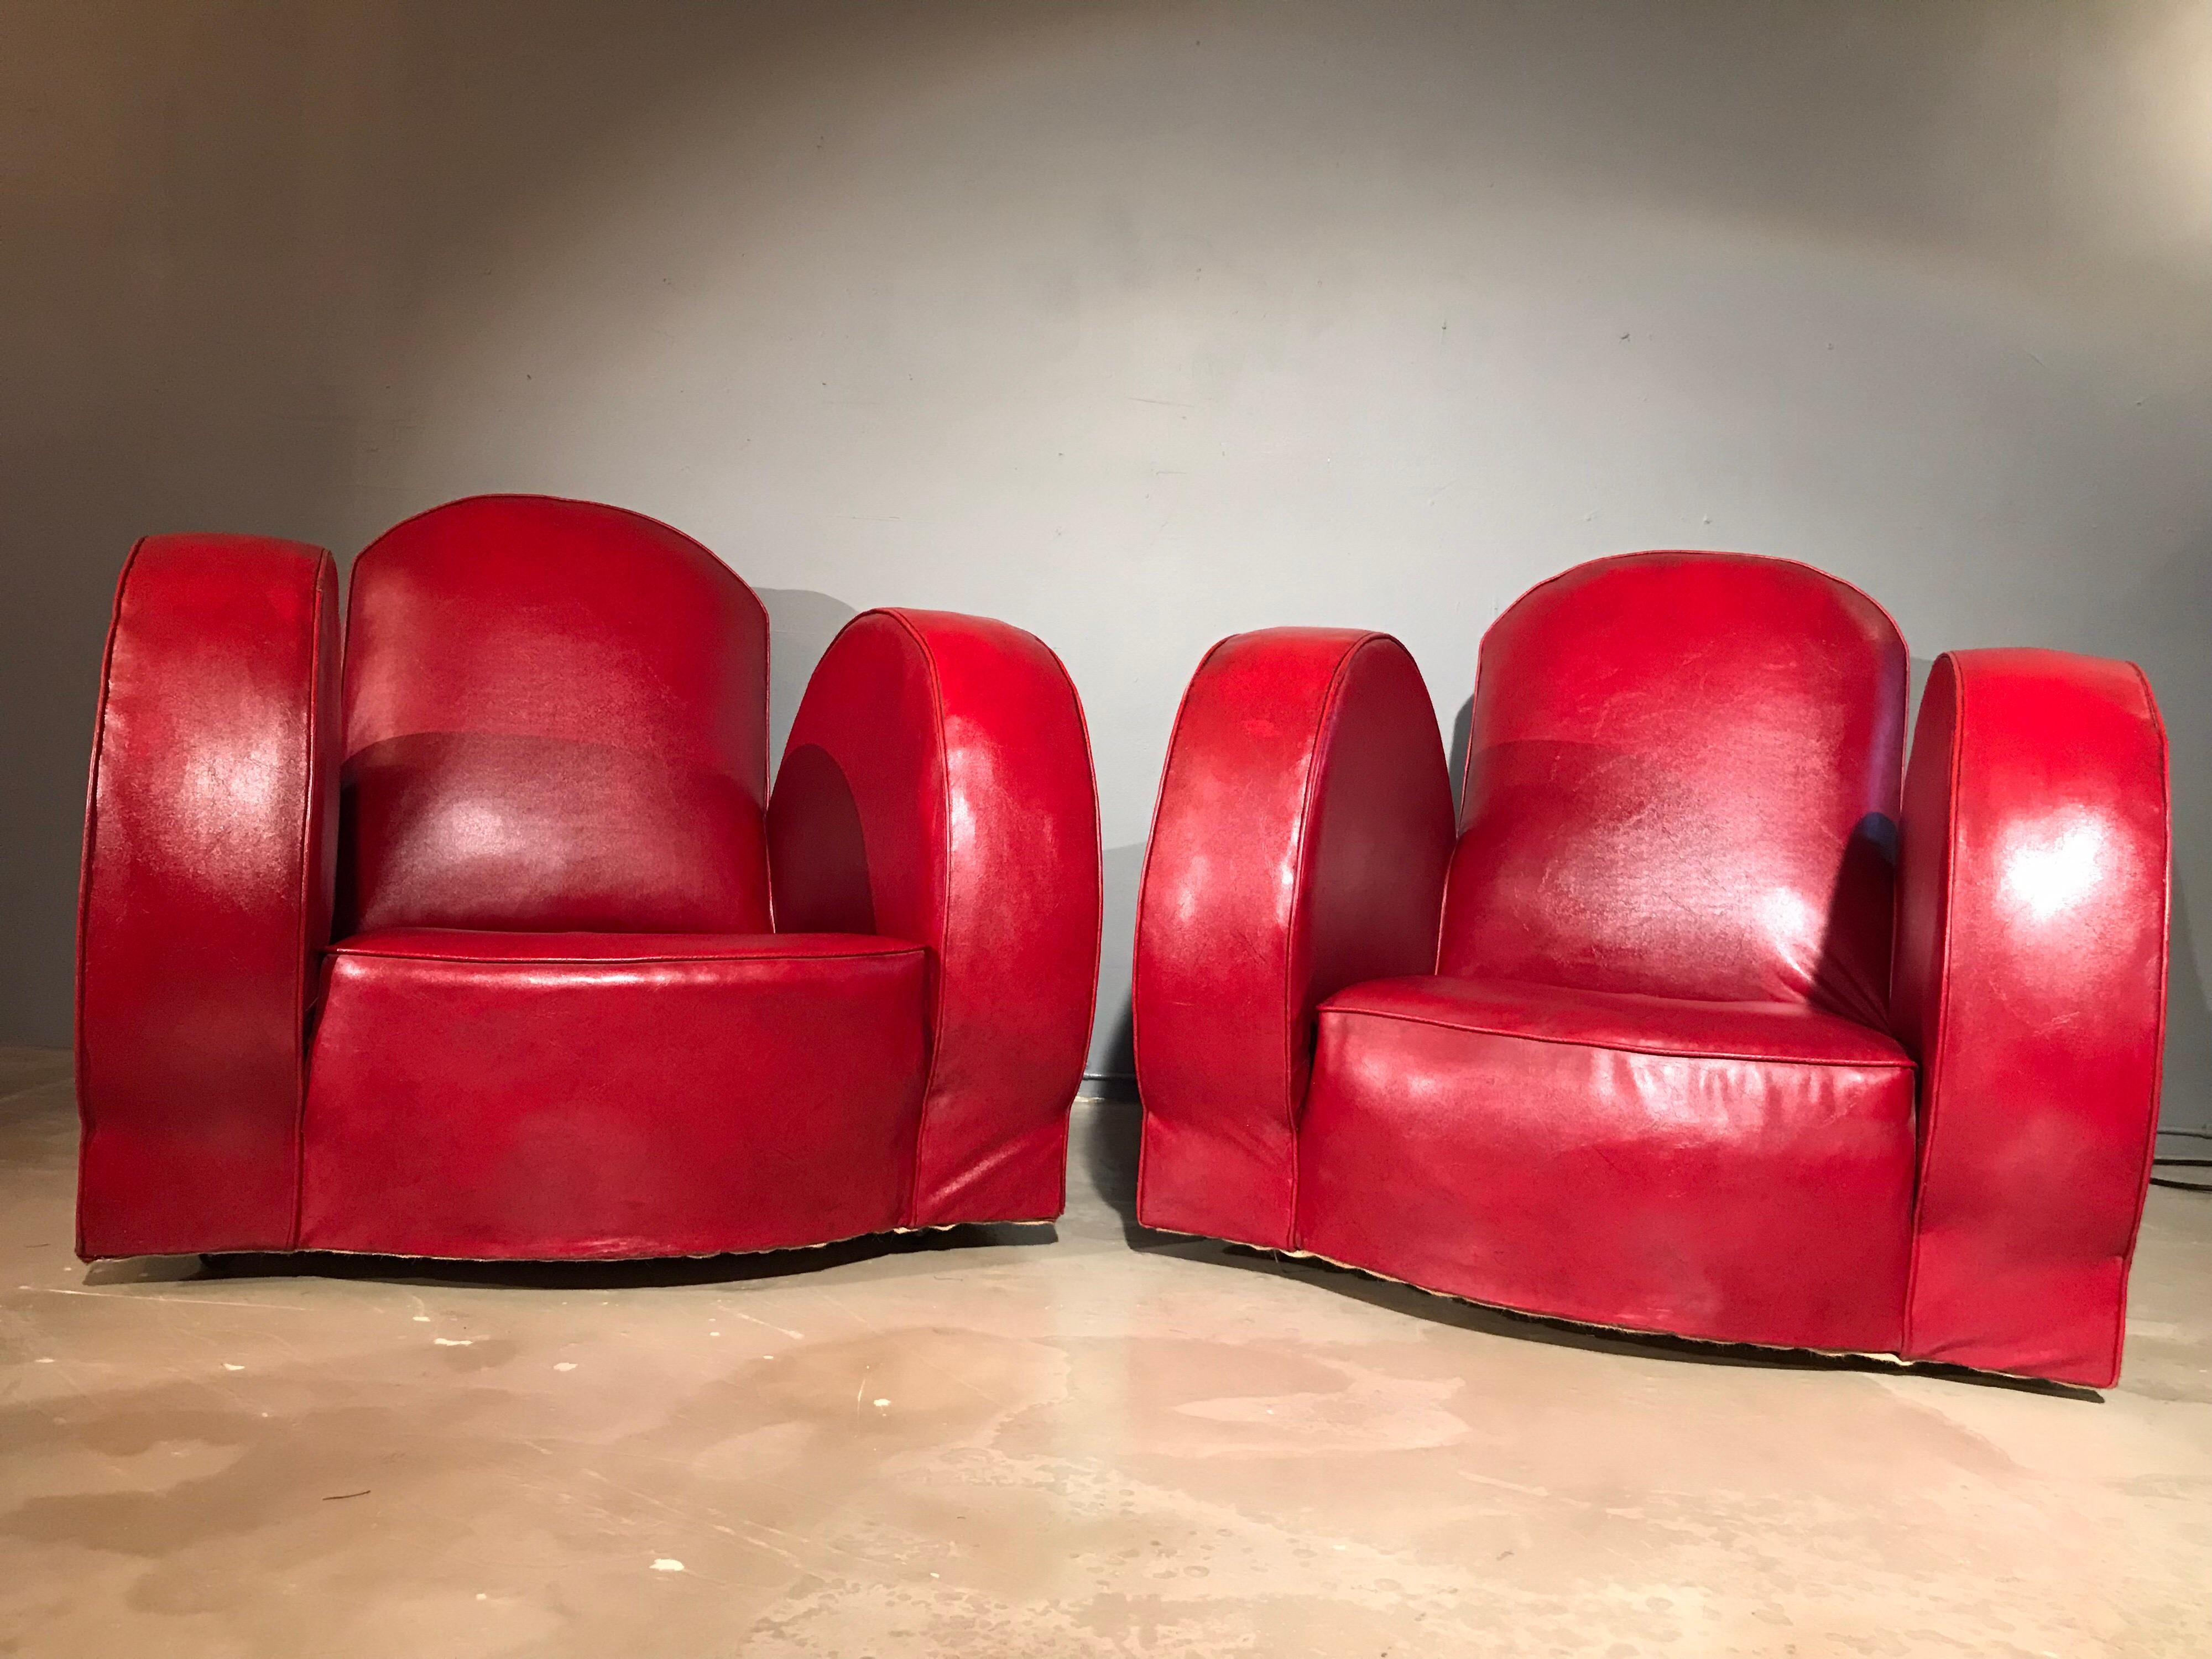 A pair of stunning lounge chairs in faux leather.
Extreme Brutalist design with a hint of Art Deco.
With the original covers mounted onto an oak frame
These chairs are starting to show their age but this just enhances the look
The oak frames are